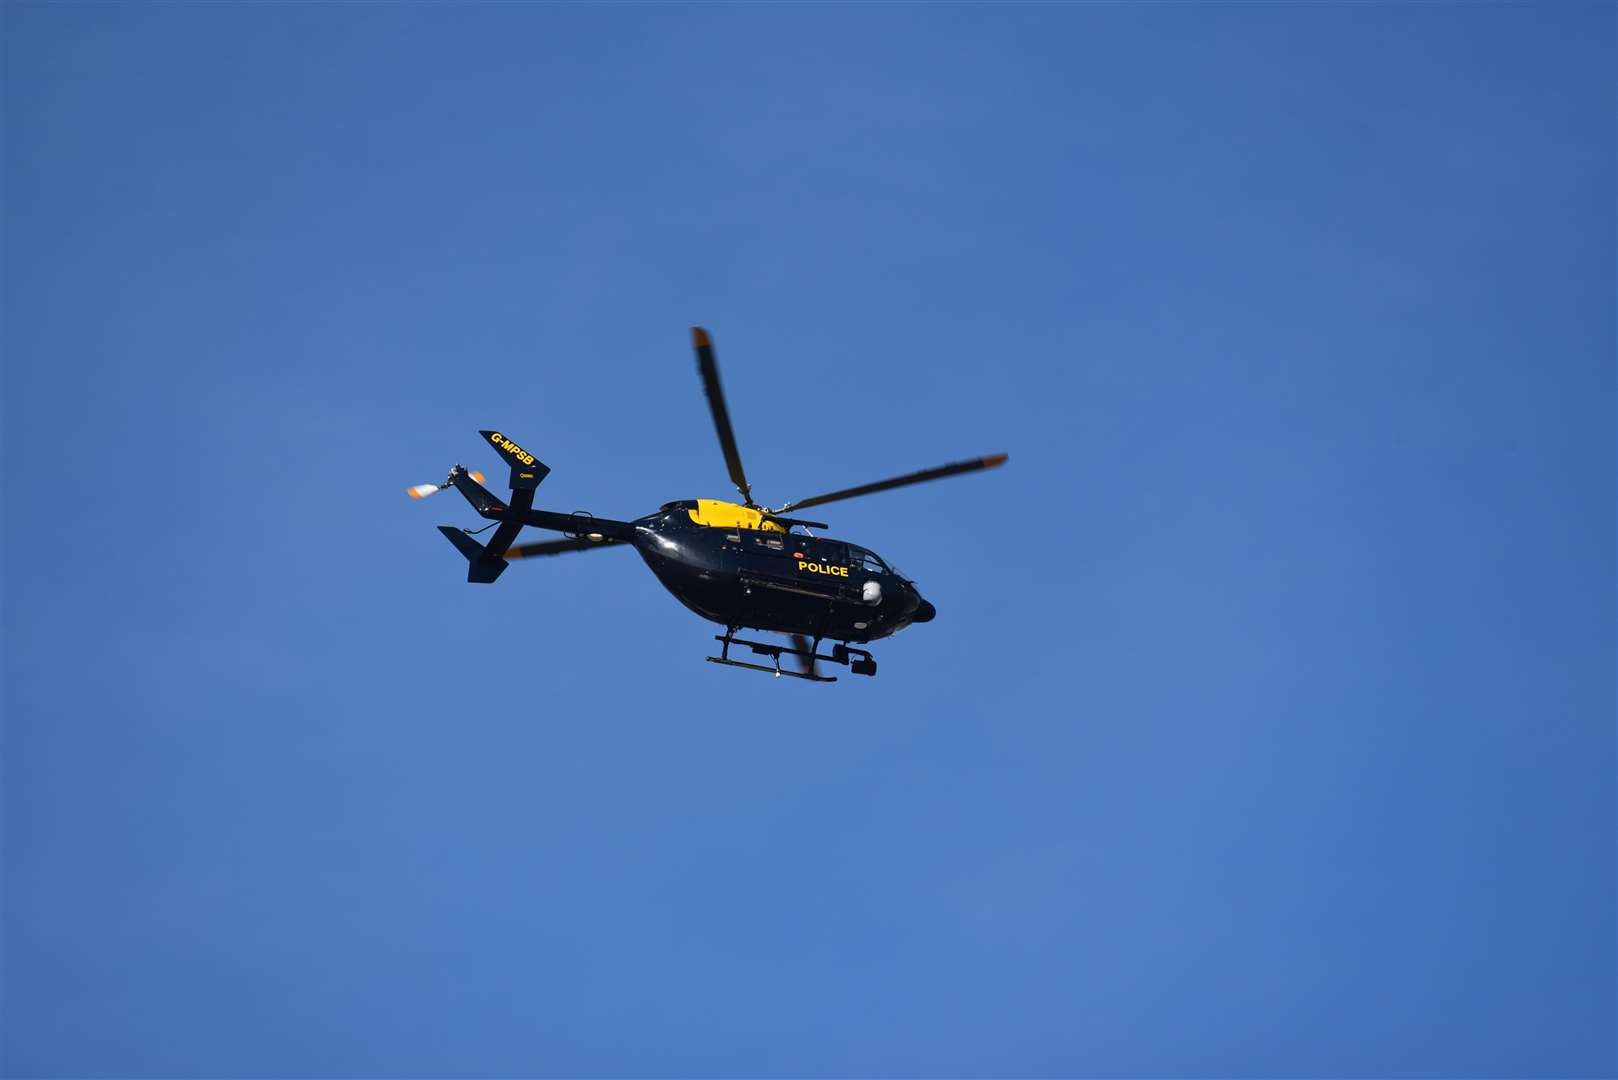 The helicopter was pictured flying over the town pier in Gravesend. (4625722)